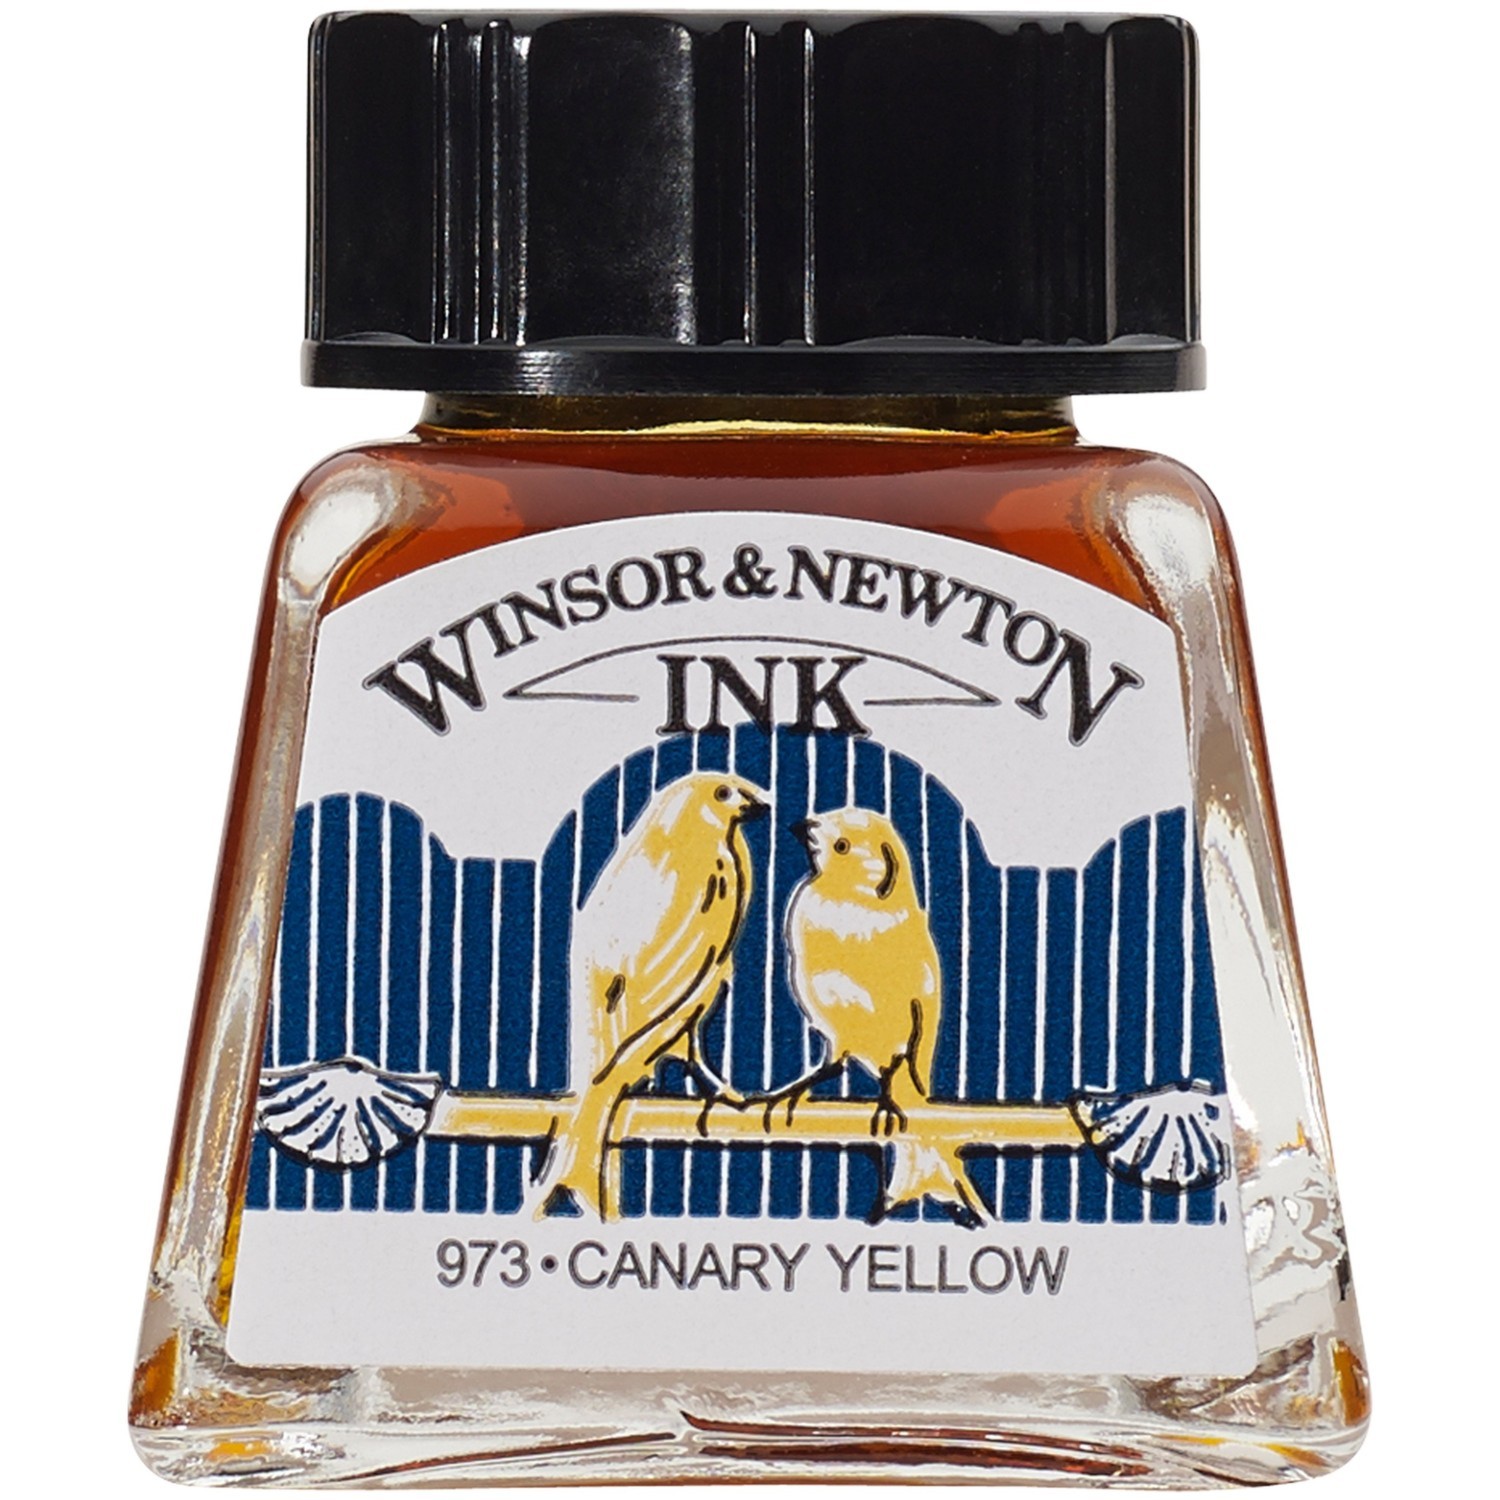 Winsor and Newton 14ml Drawing Ink - Canary Yellow Image 1